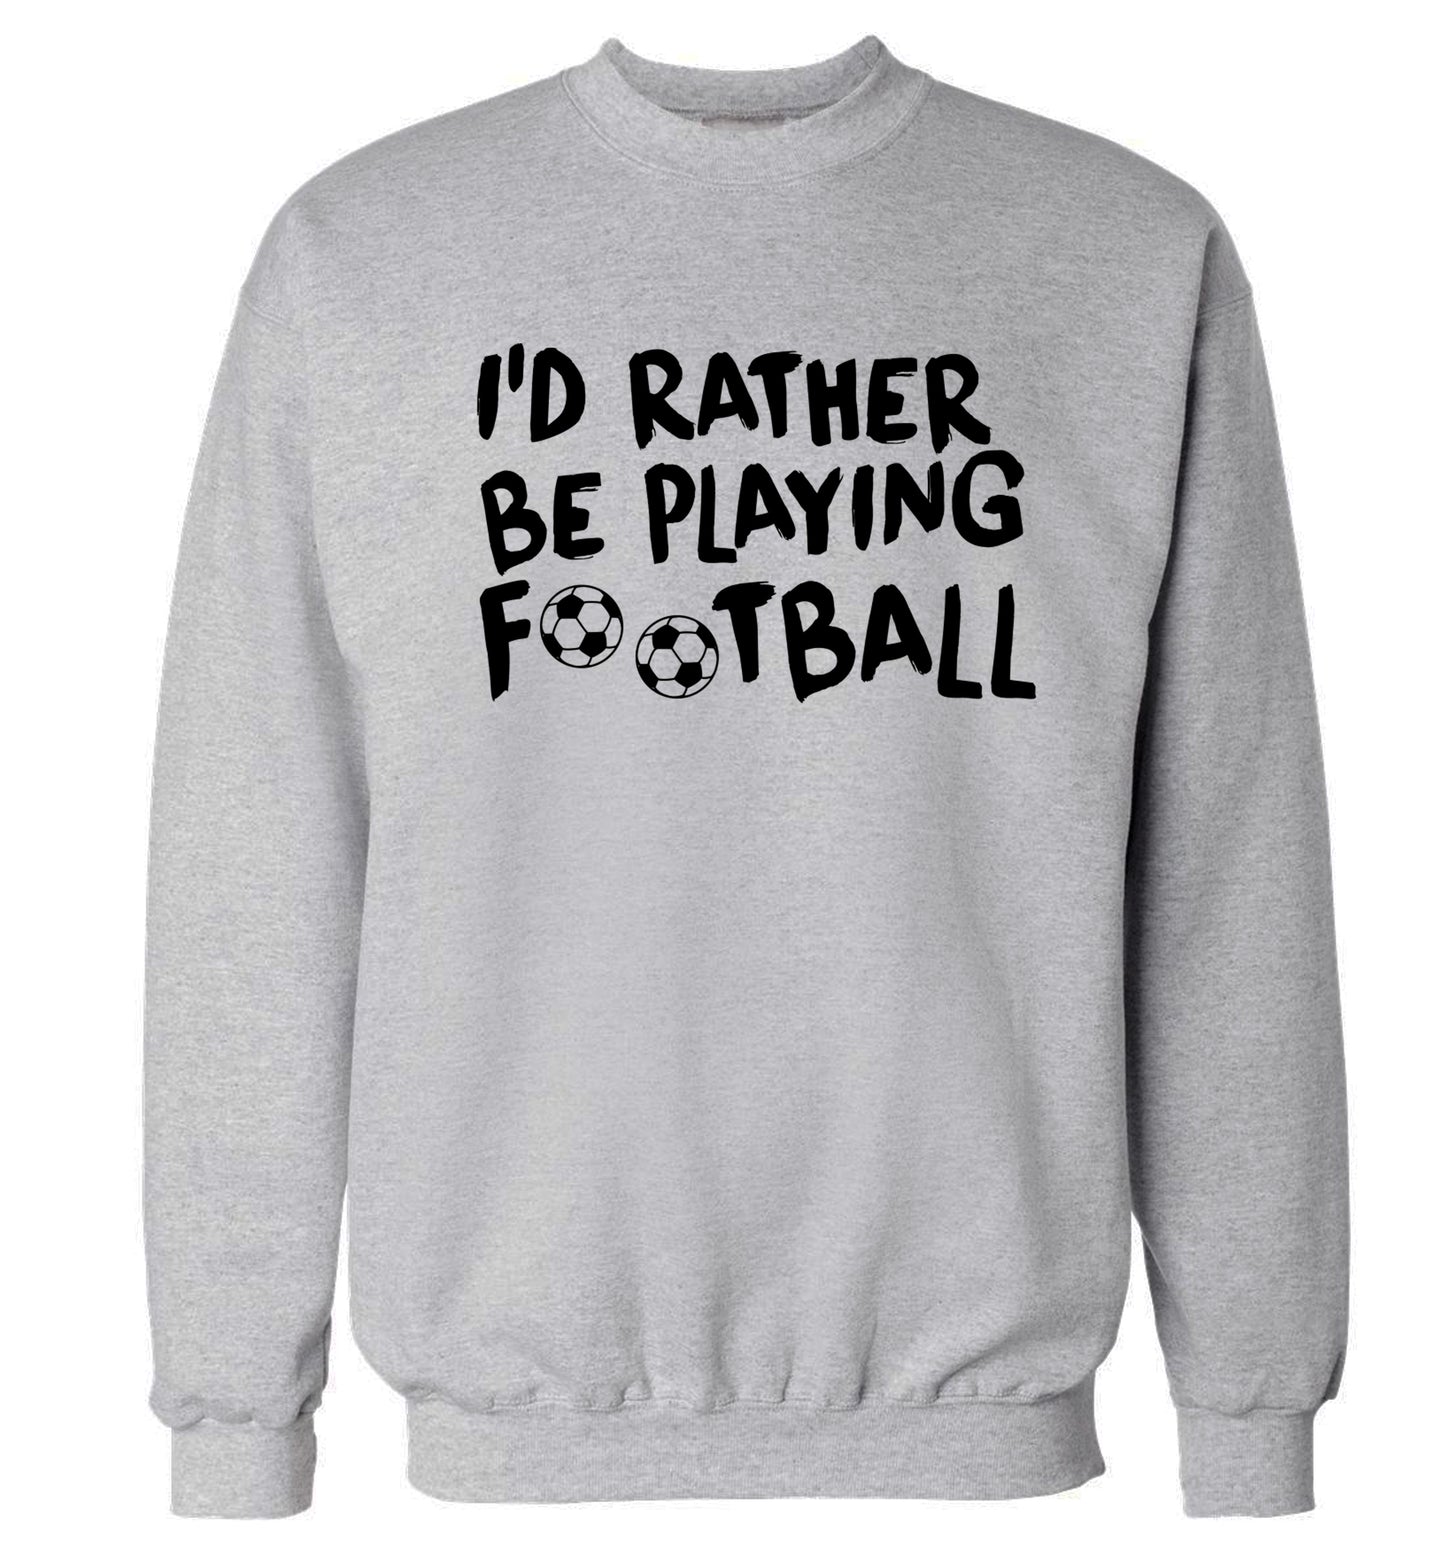 I'd rather be playing football Adult's unisexgrey Sweater 2XL